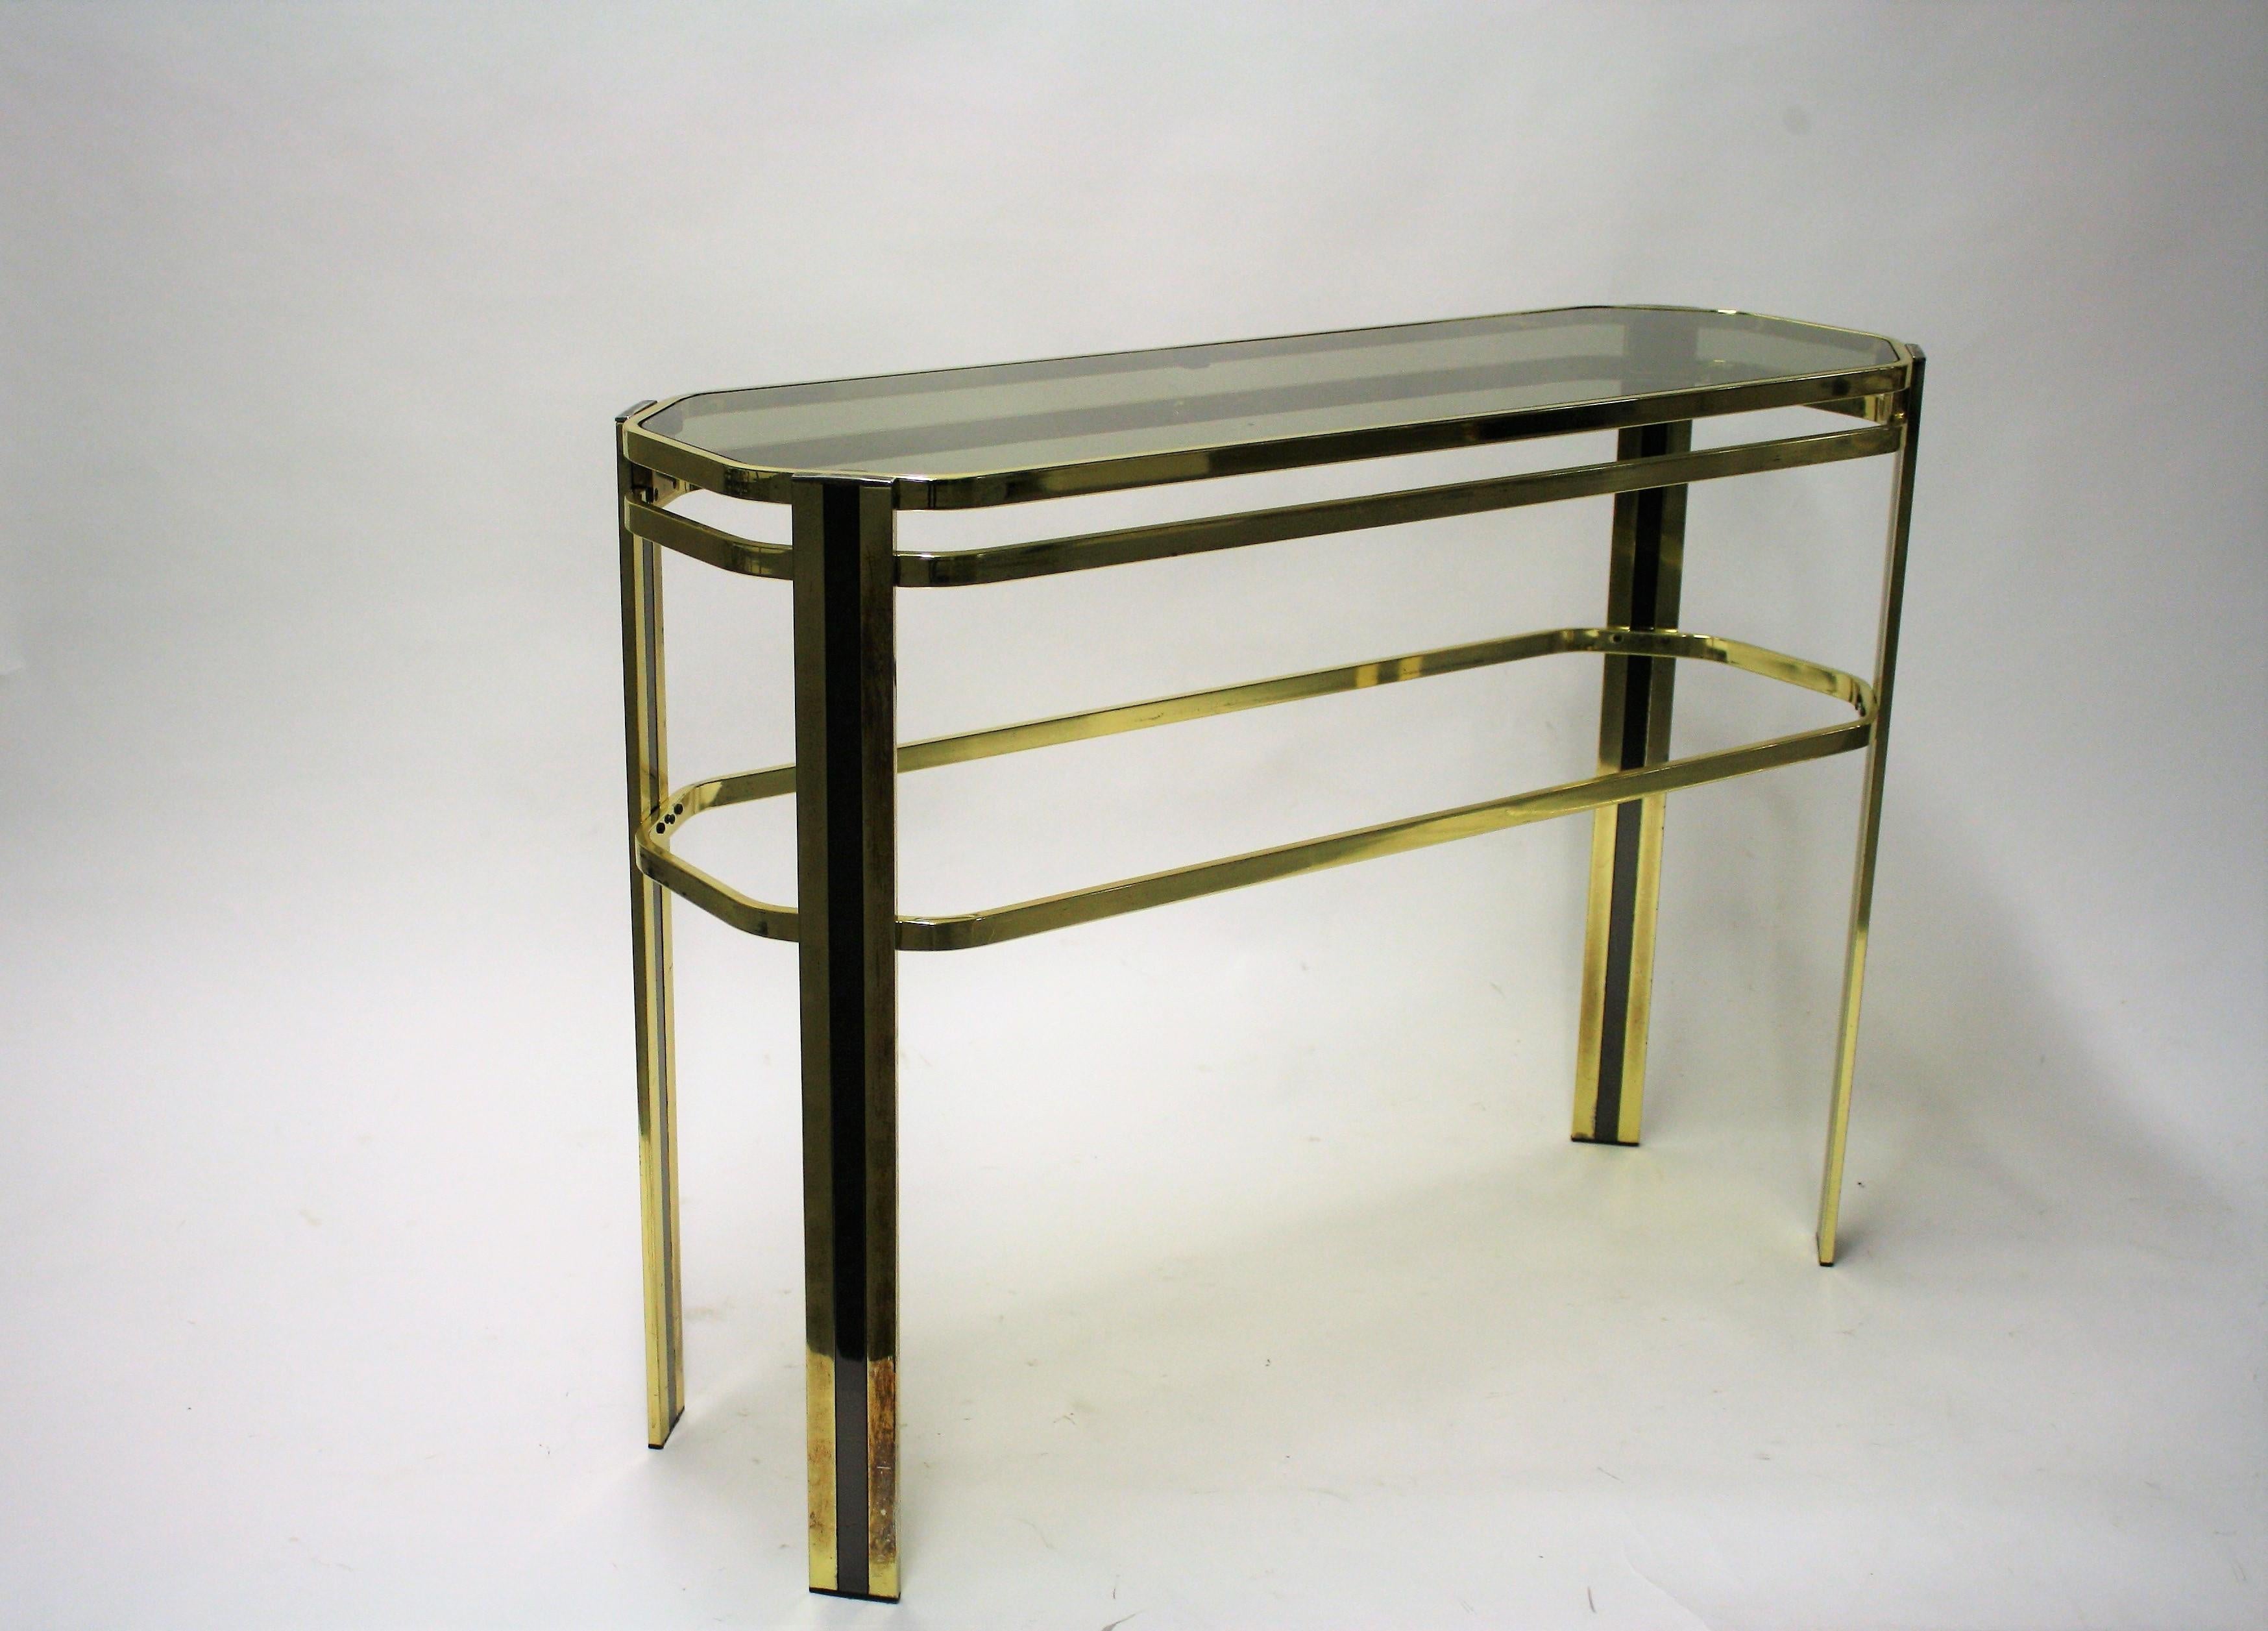 Vintage brass console table with a smoked glass top.

The console table is in original untouched condition, showing some patina.

It can of course be entirely polished if desired.

Good condition, original glass.

1970s,